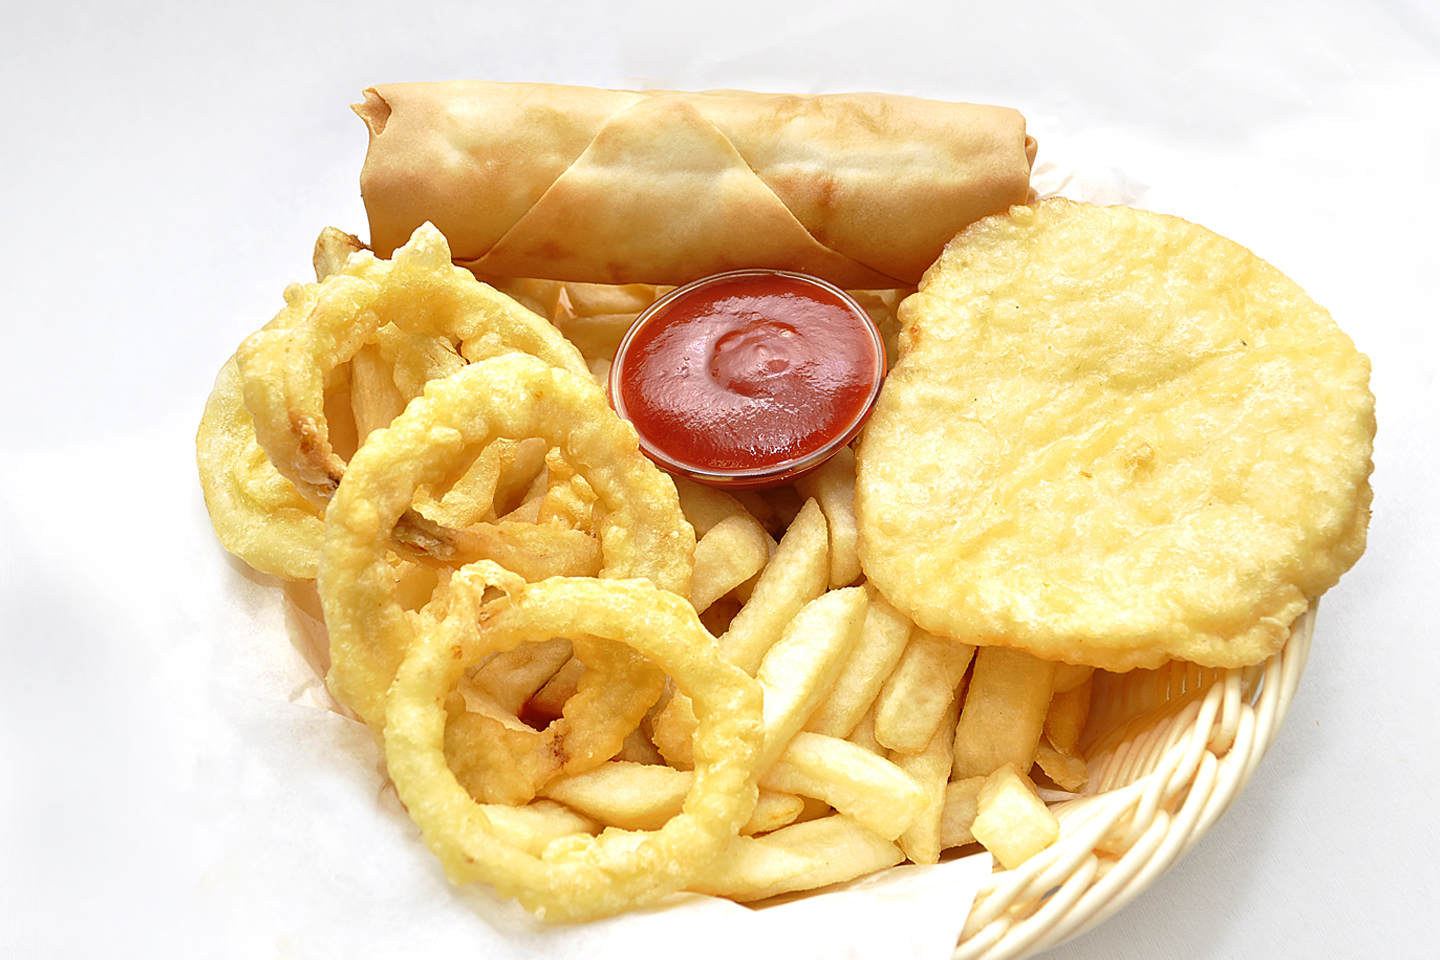 Food Photography Melbourne - Fried Fish& Finger Chips Photo